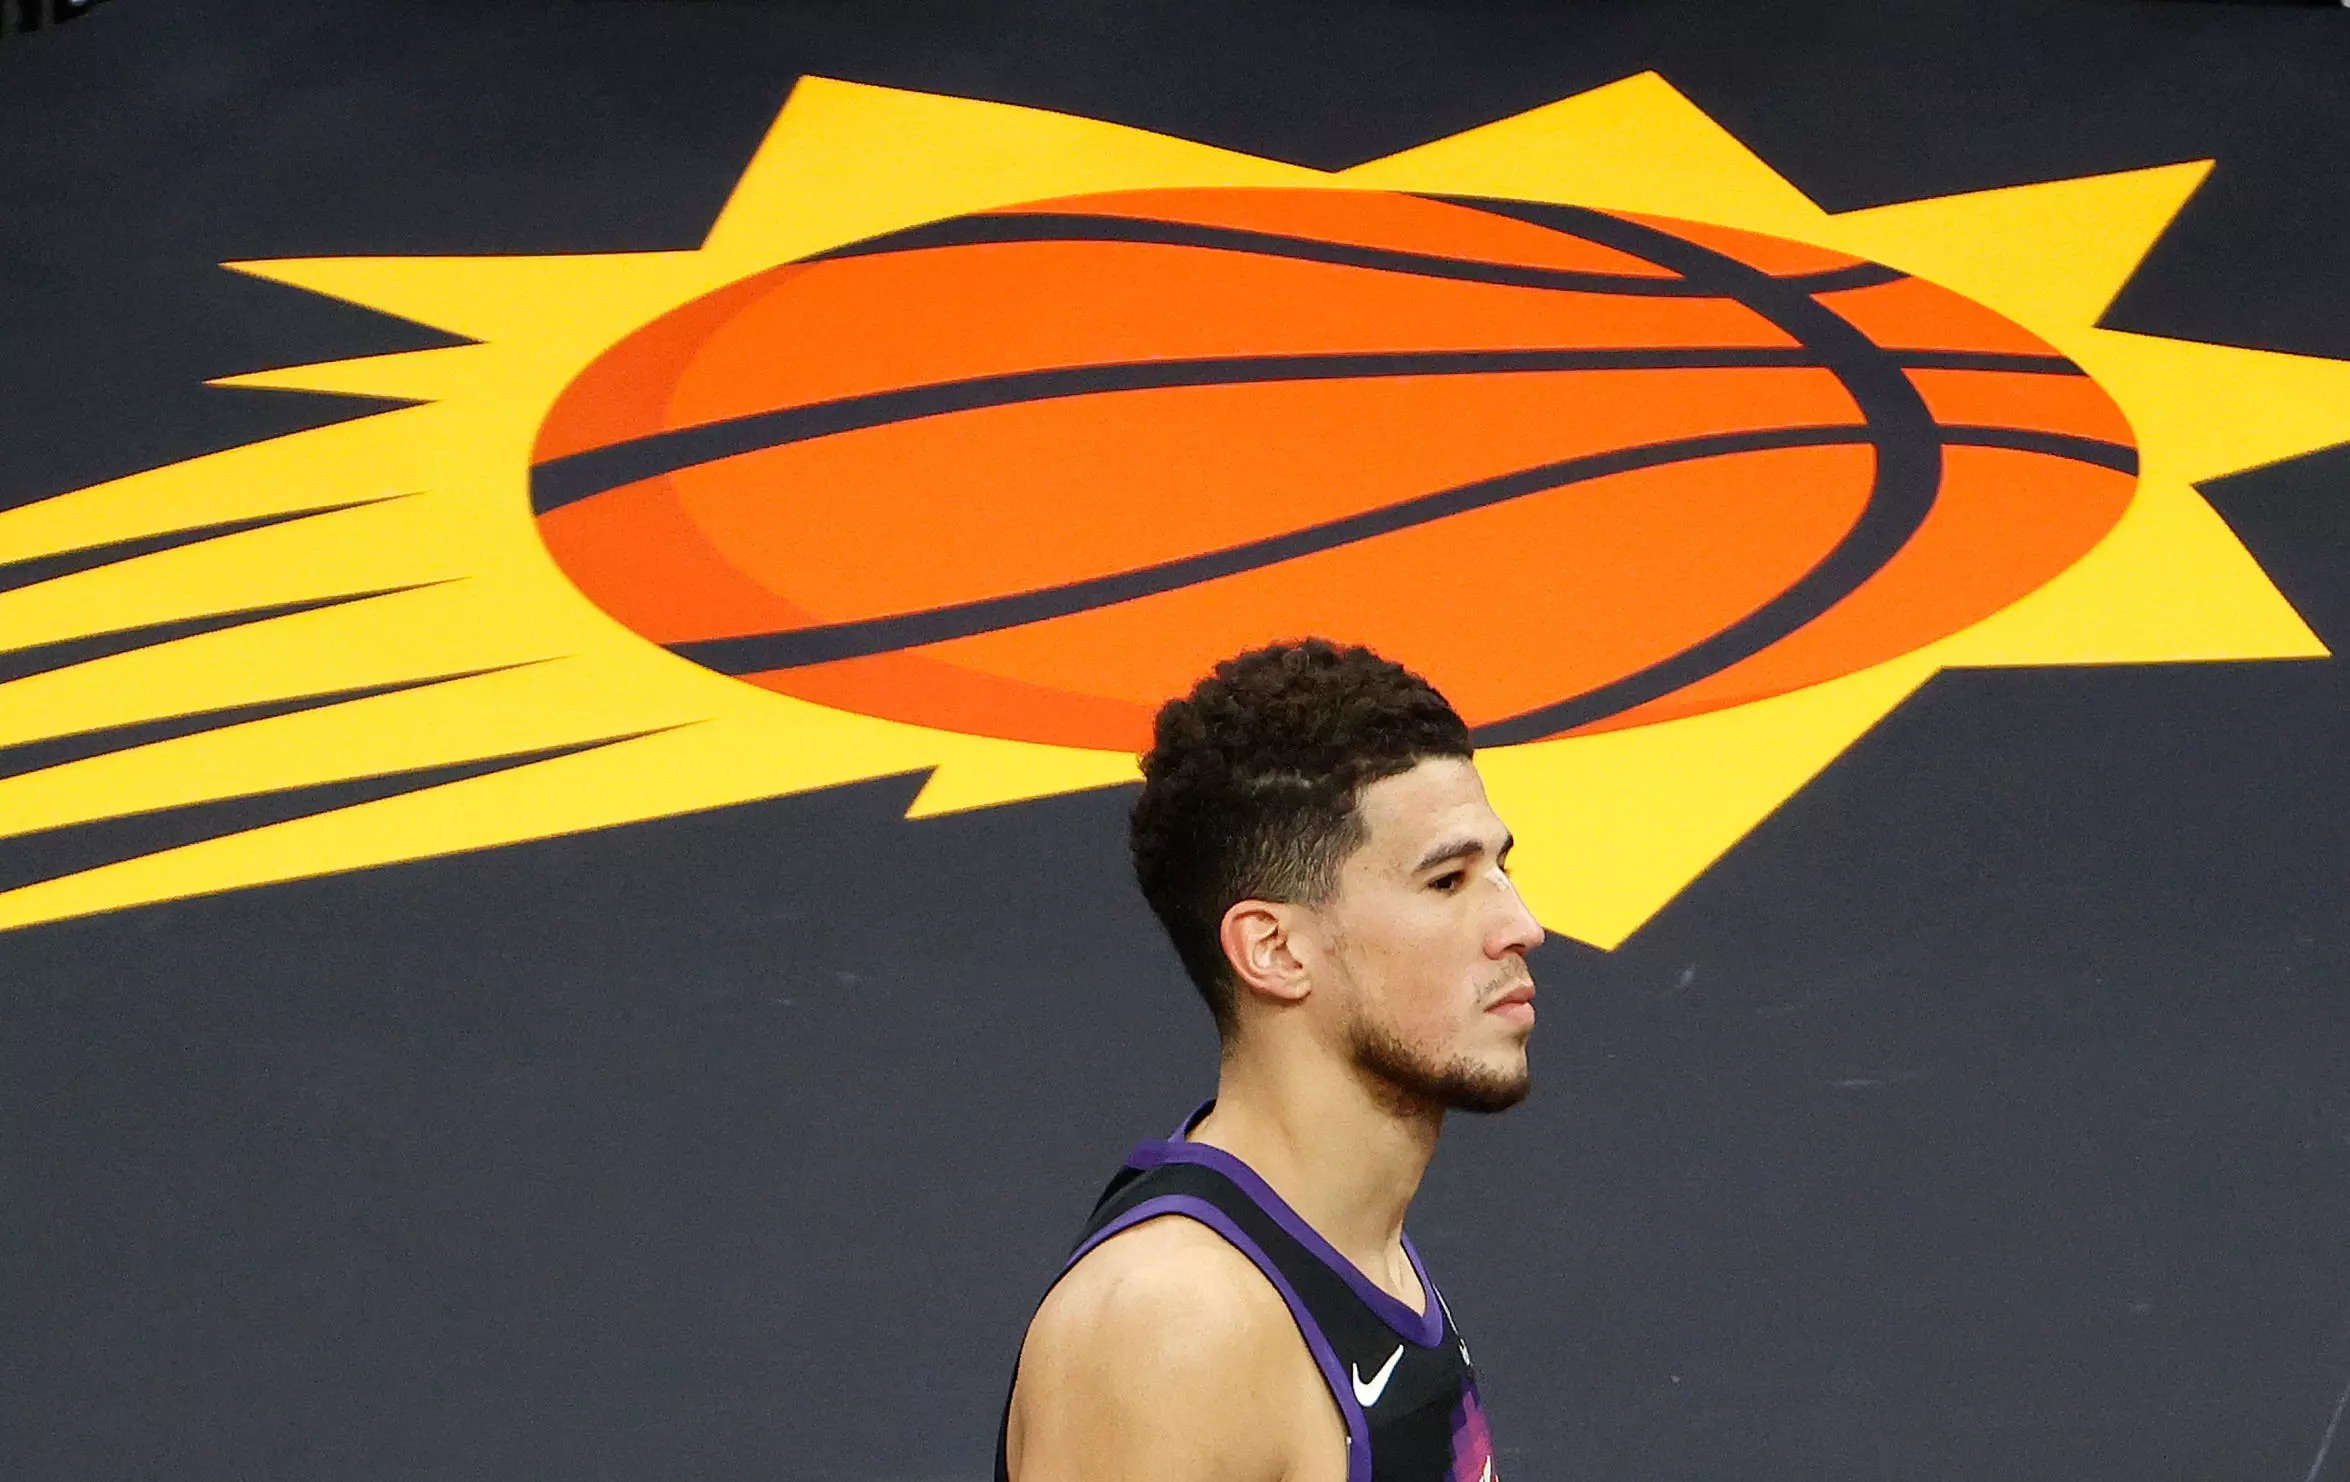 Phoenix Suns and Mercury will air games on free TV and streaming, becoming first teams to break with bankrupt broadcaster Diamond Sports Business Insider India